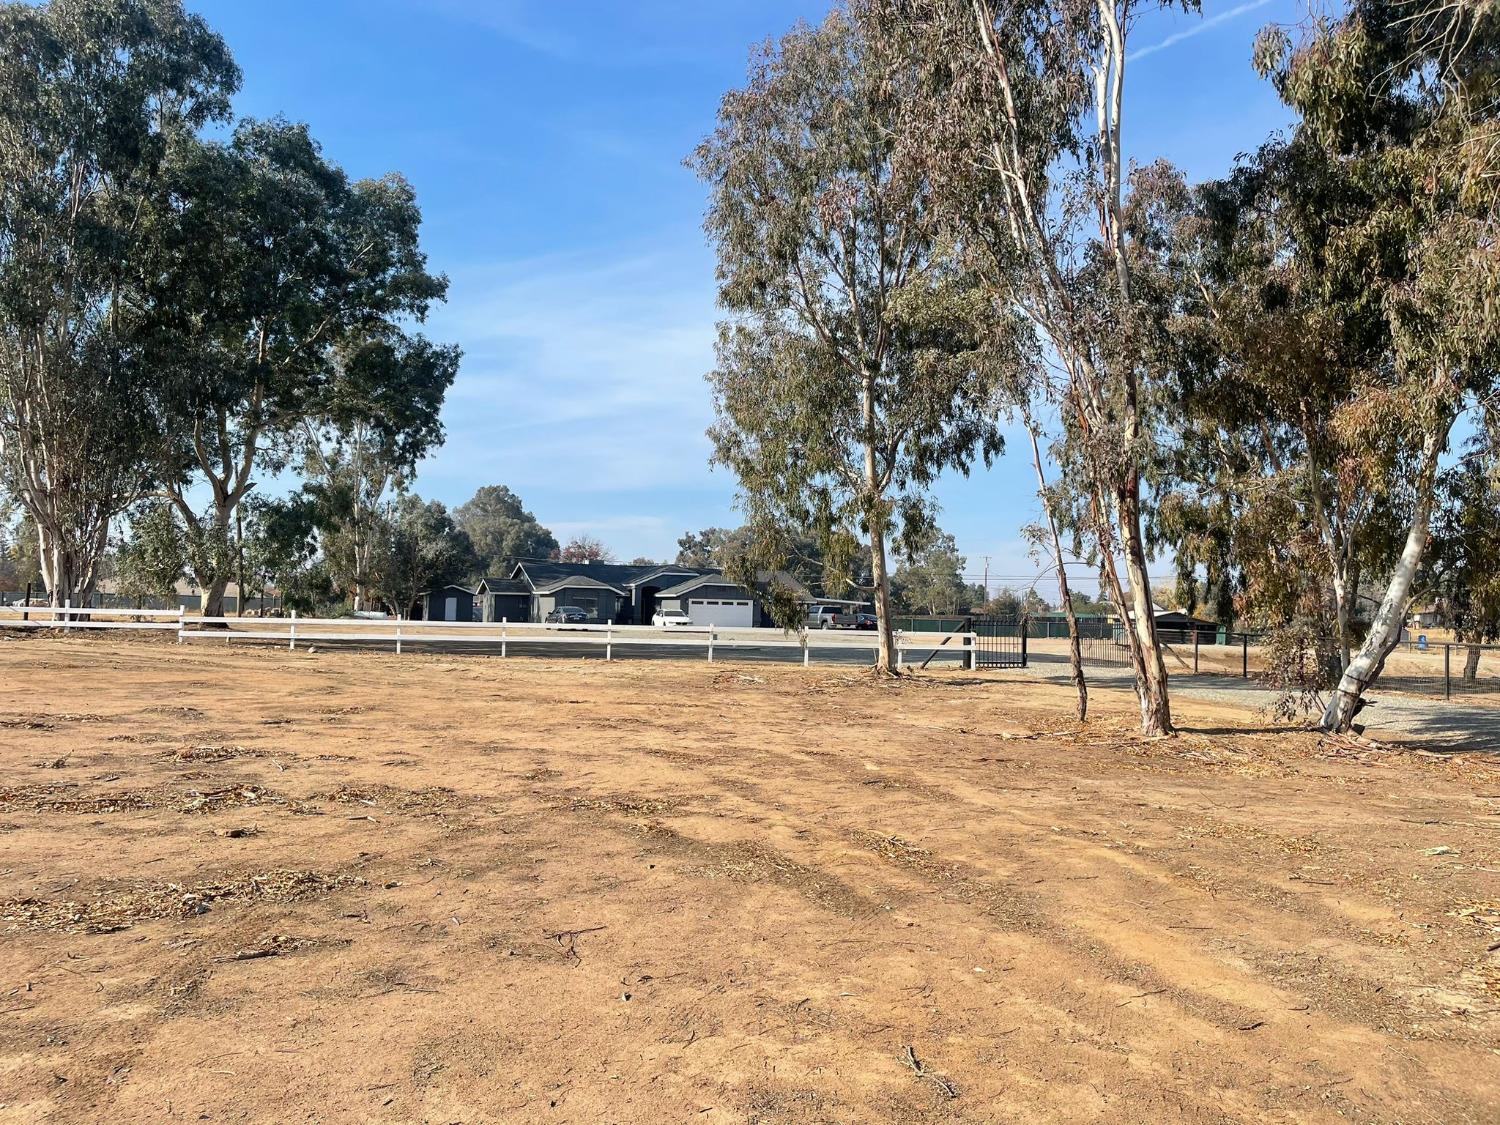 Photo of 12606 Gleason Dr in Madera, CA